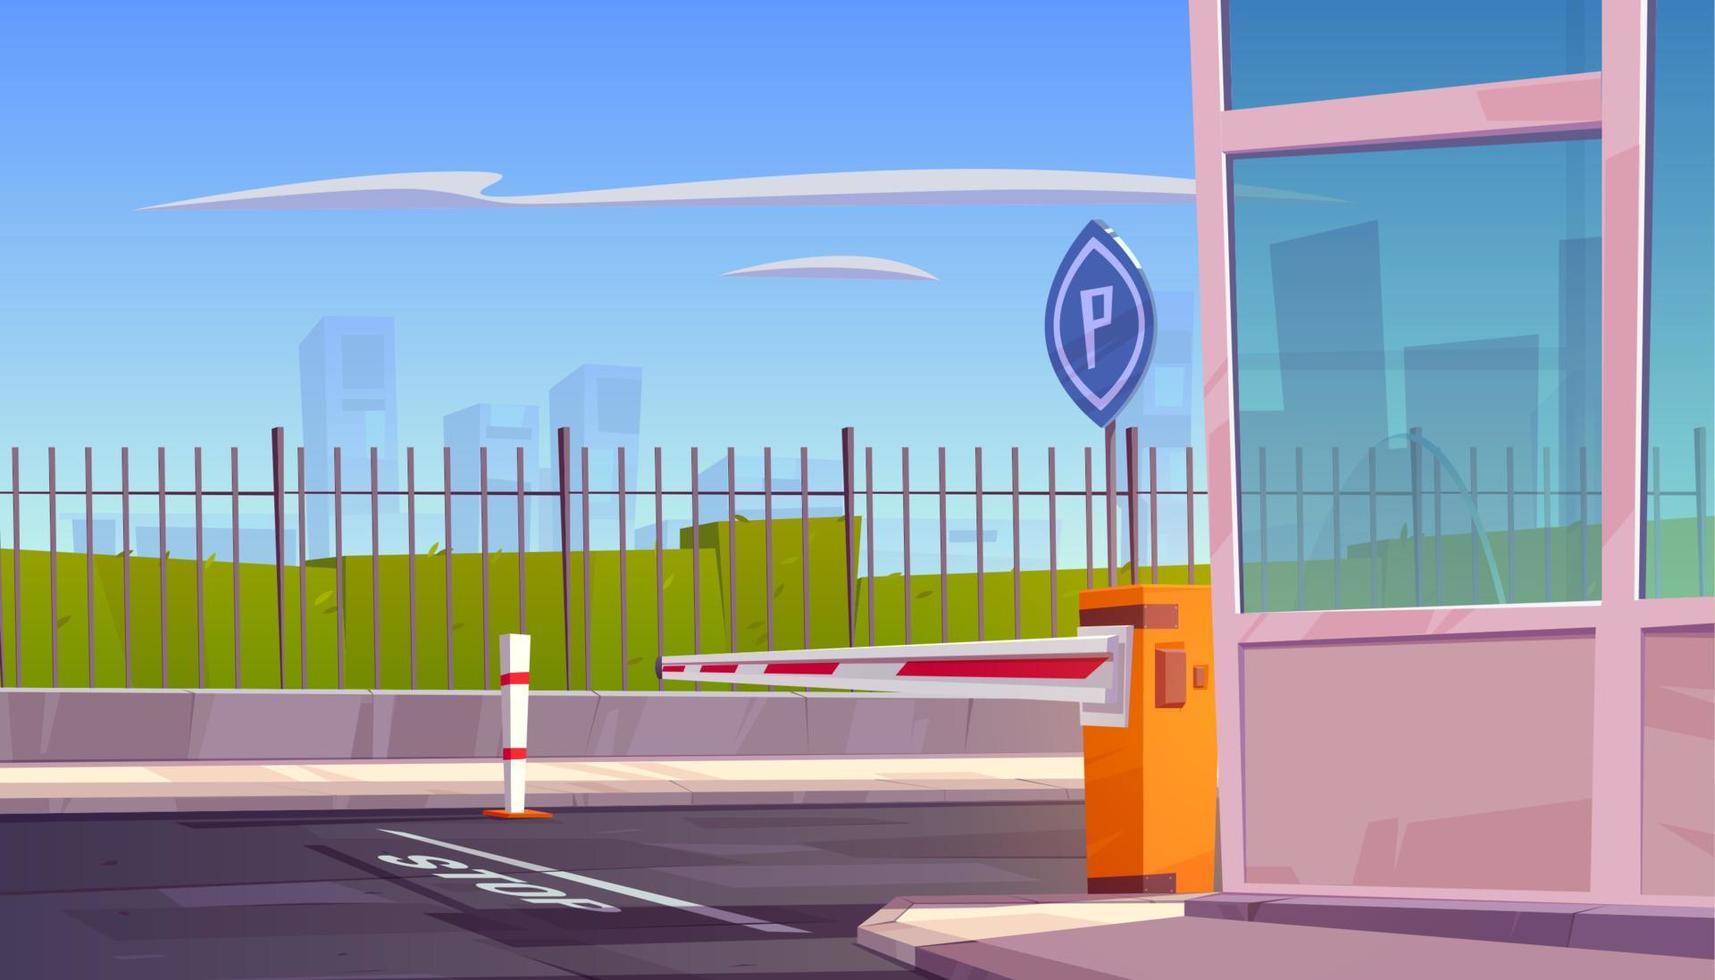 Parking security entrance with car barrier, booth vector